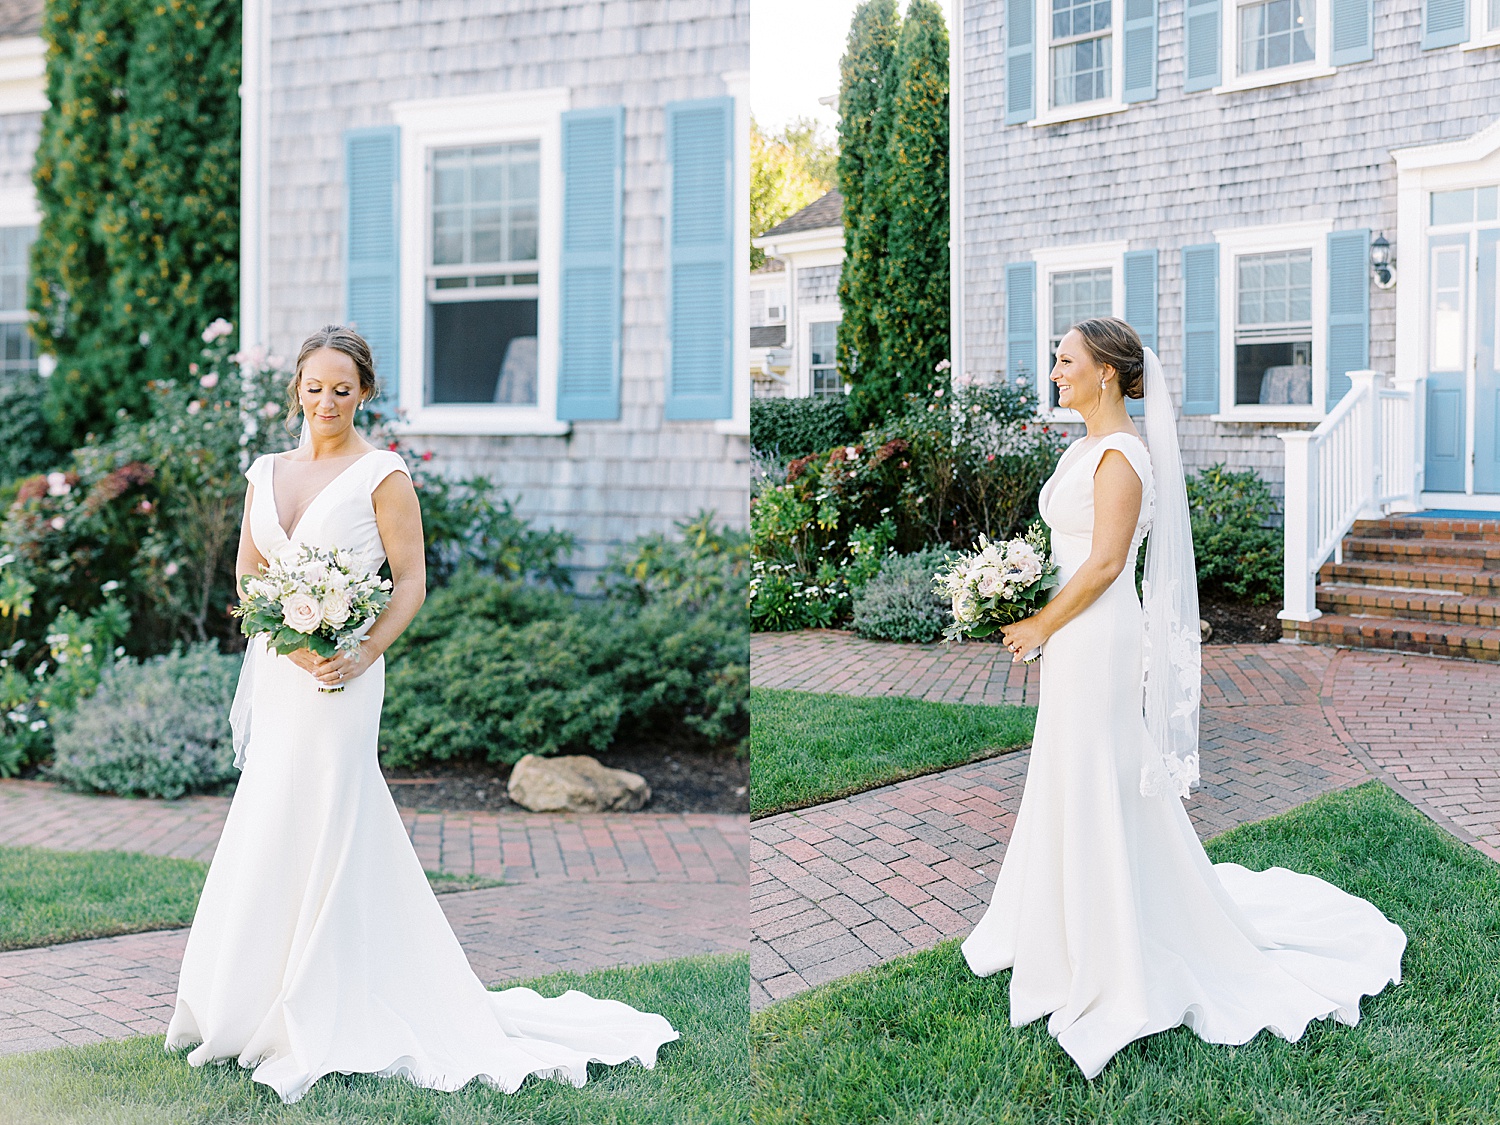 Bride standing on lawn in front of a house with blue shutters 